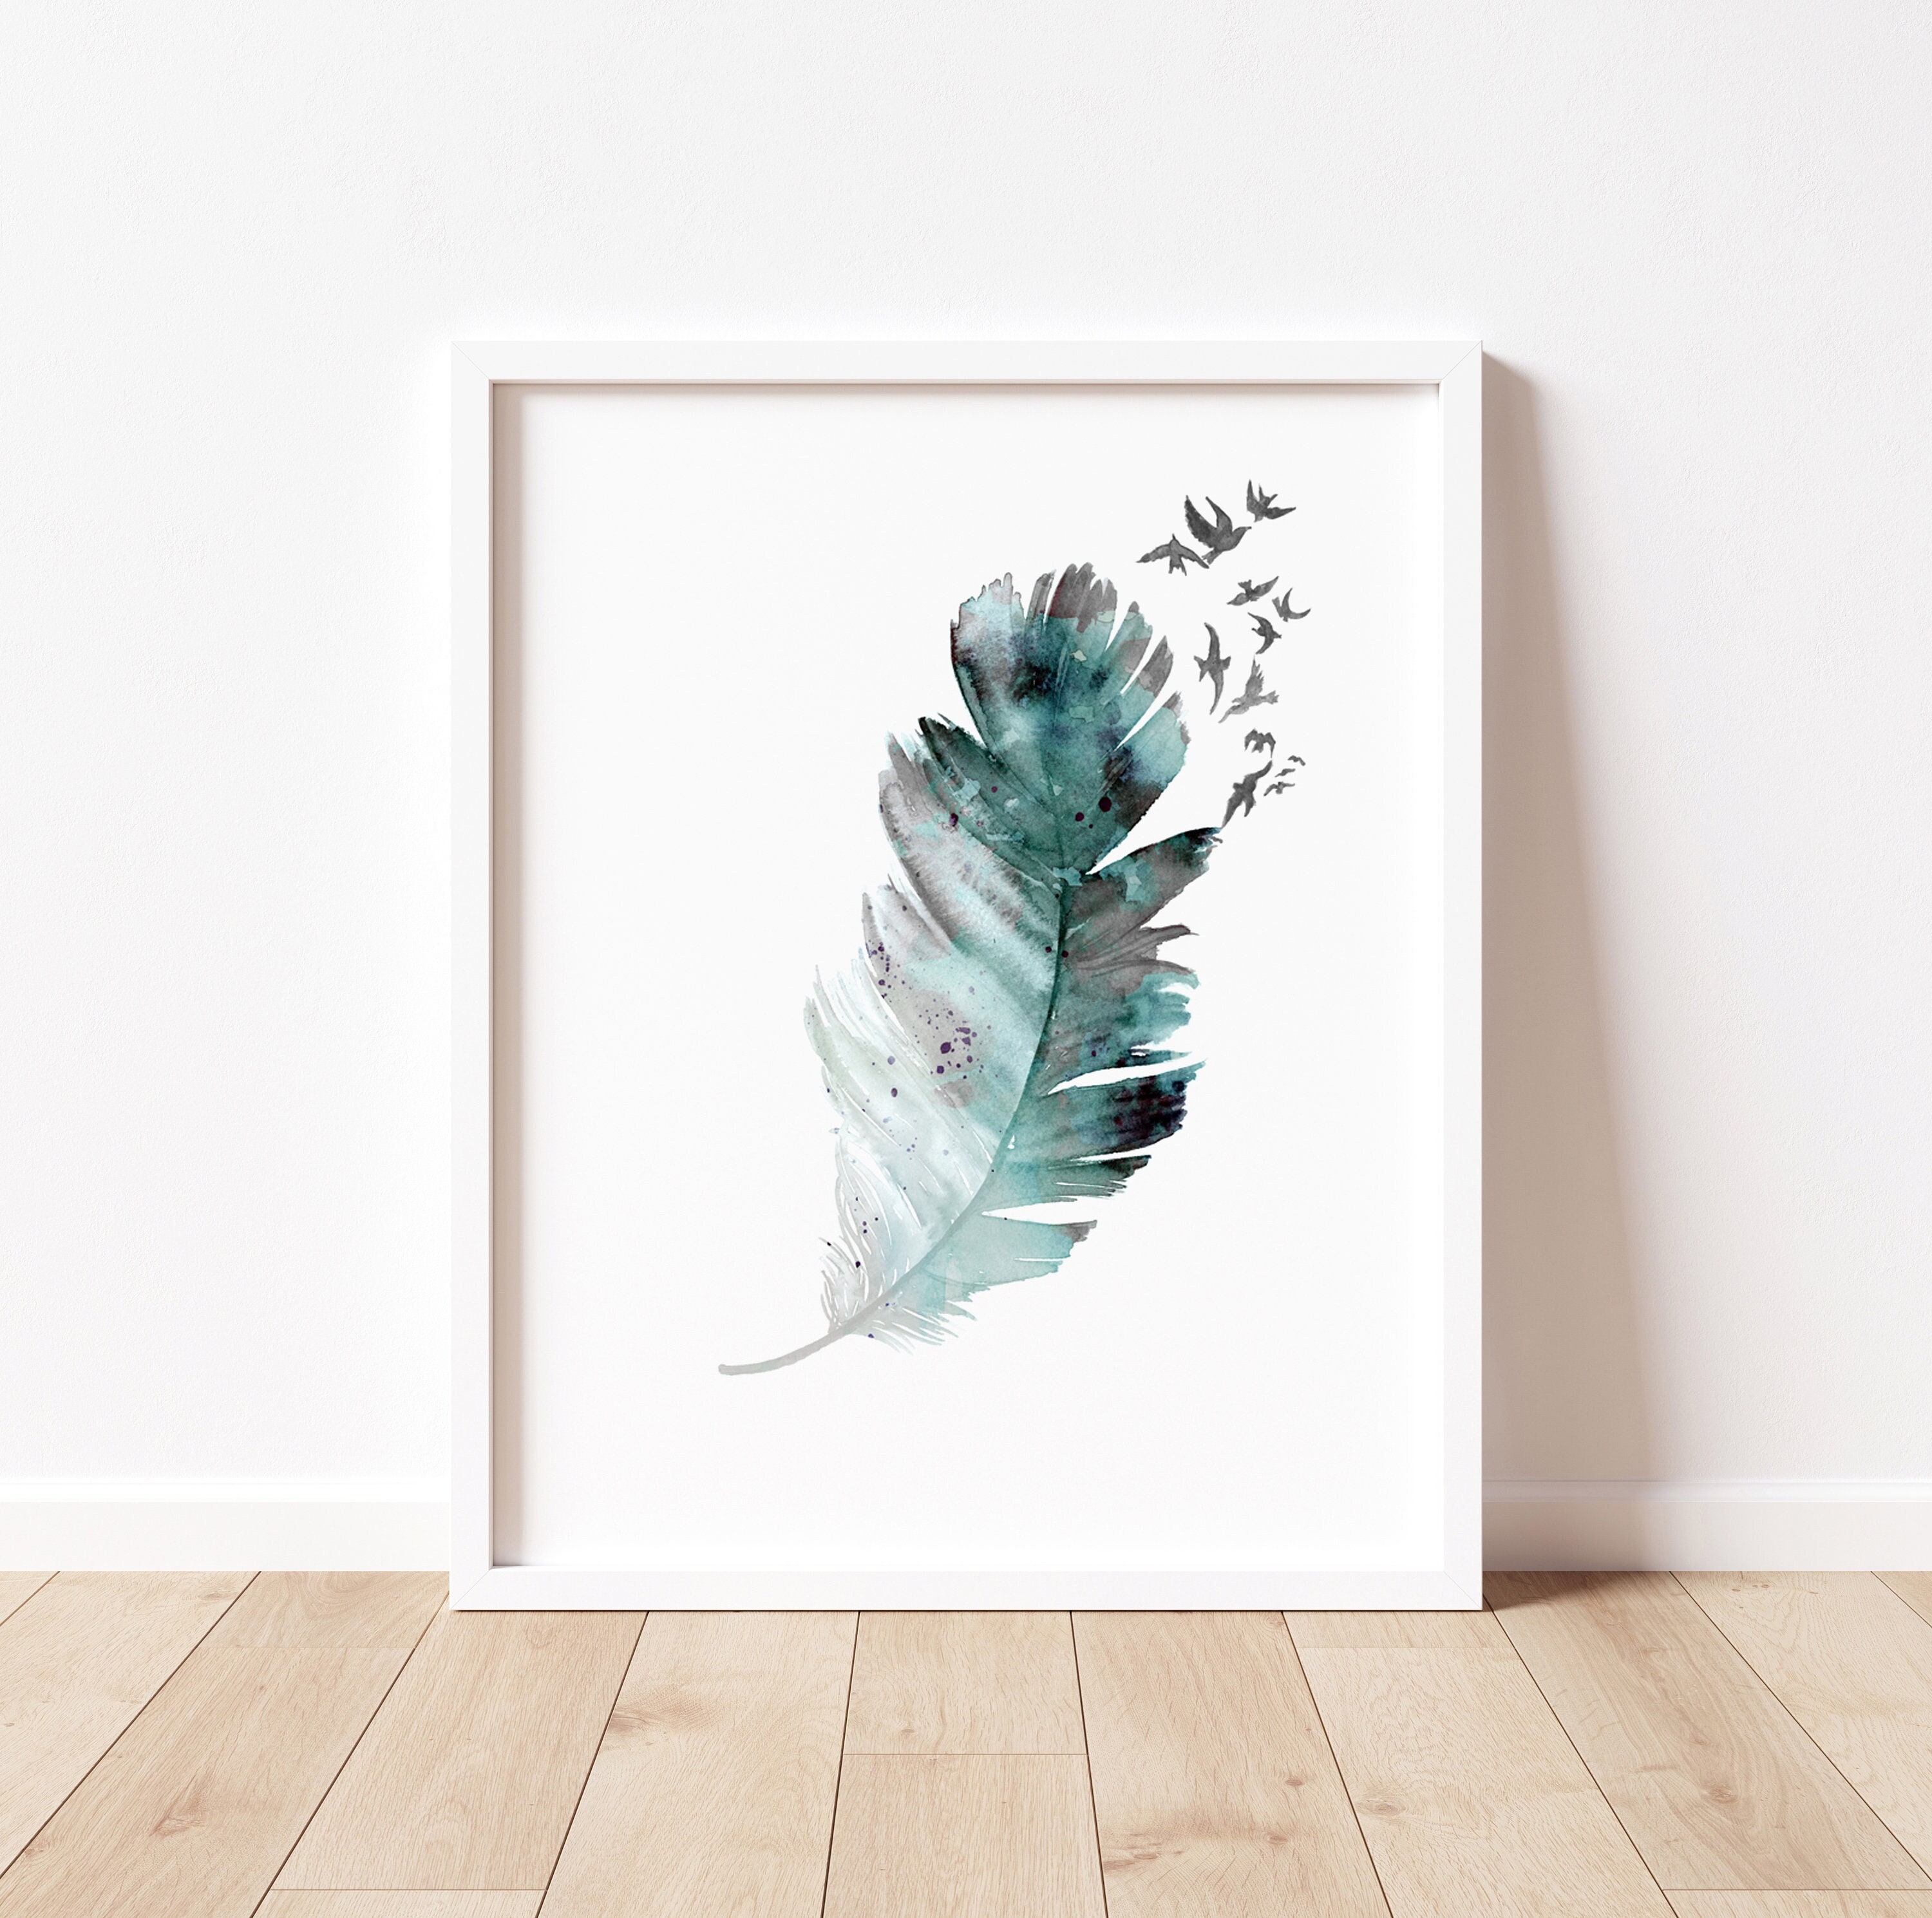 Feather Art Decor, Birds Flying, Feather With Birds, Abstract Print,  Feather Wall Art, Minimalist Watercolor, Feather Wall Decor 